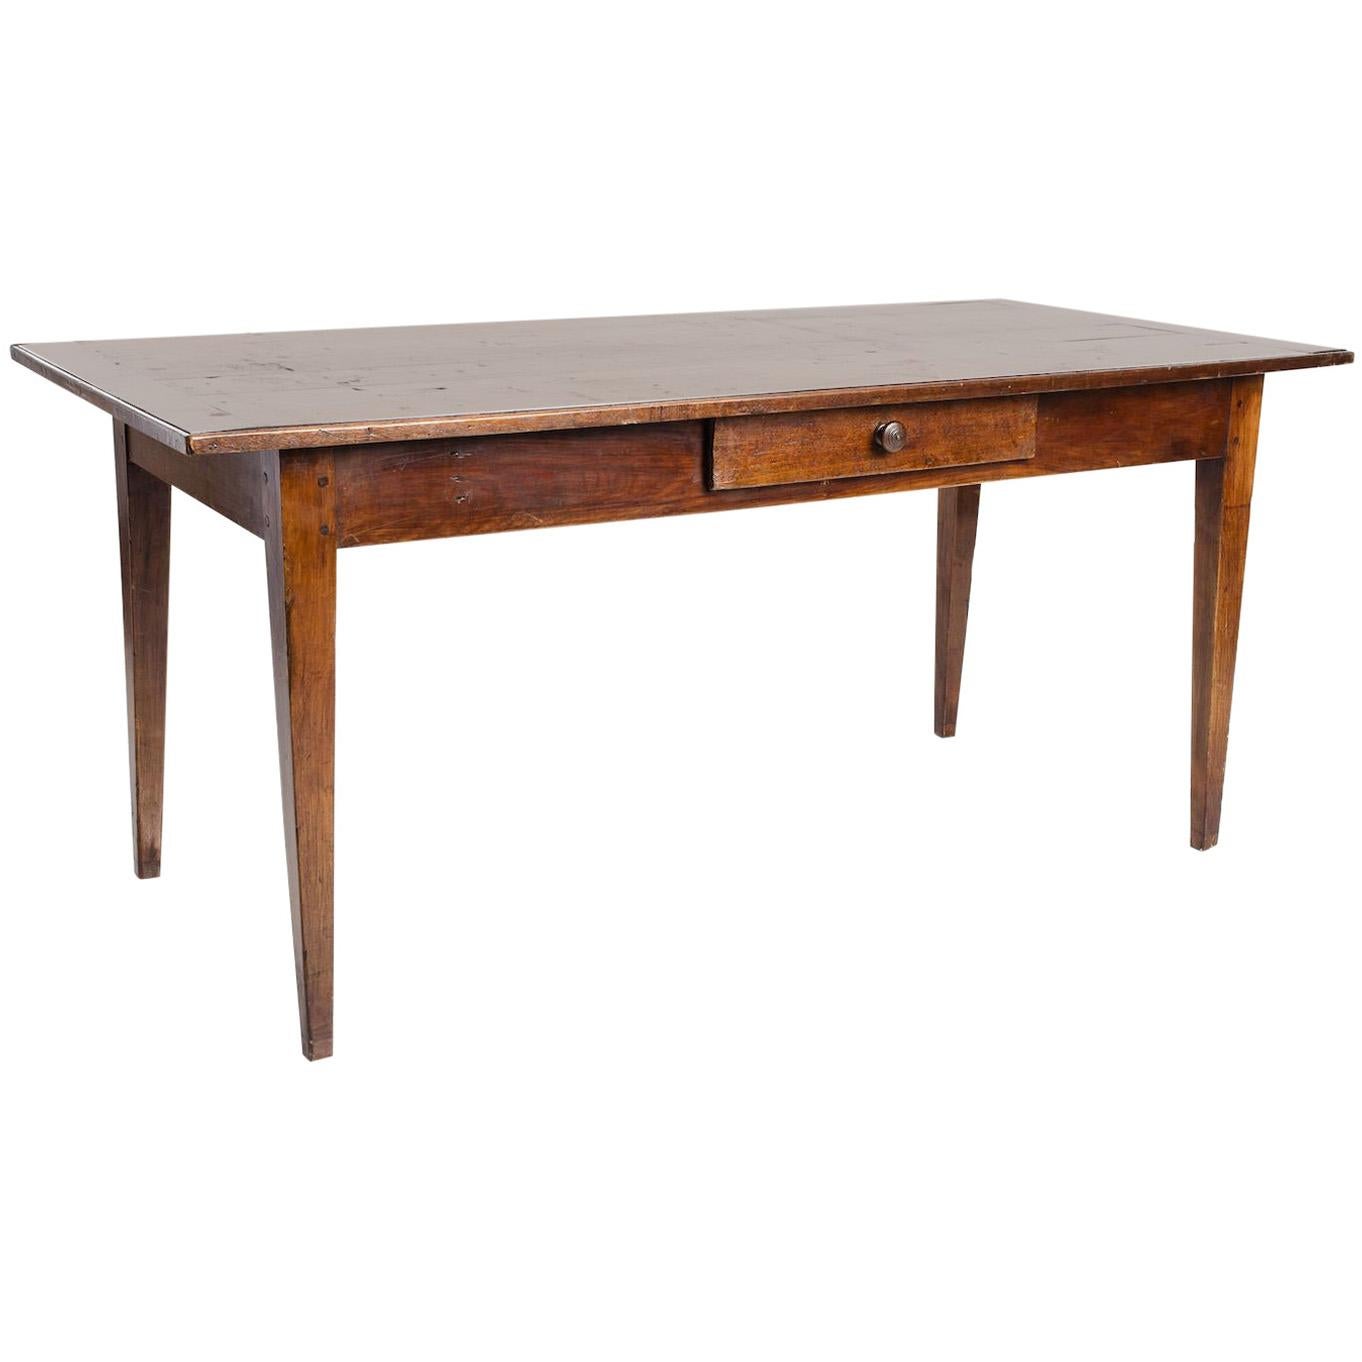 Handsome antique wood table with single drawer, made in England, circa 1860. Minimal silhouette features straight lines and tapered legs. Made from cherrywood, the table has a smooth, satin surface with beautiful age and patina. A functional drawer